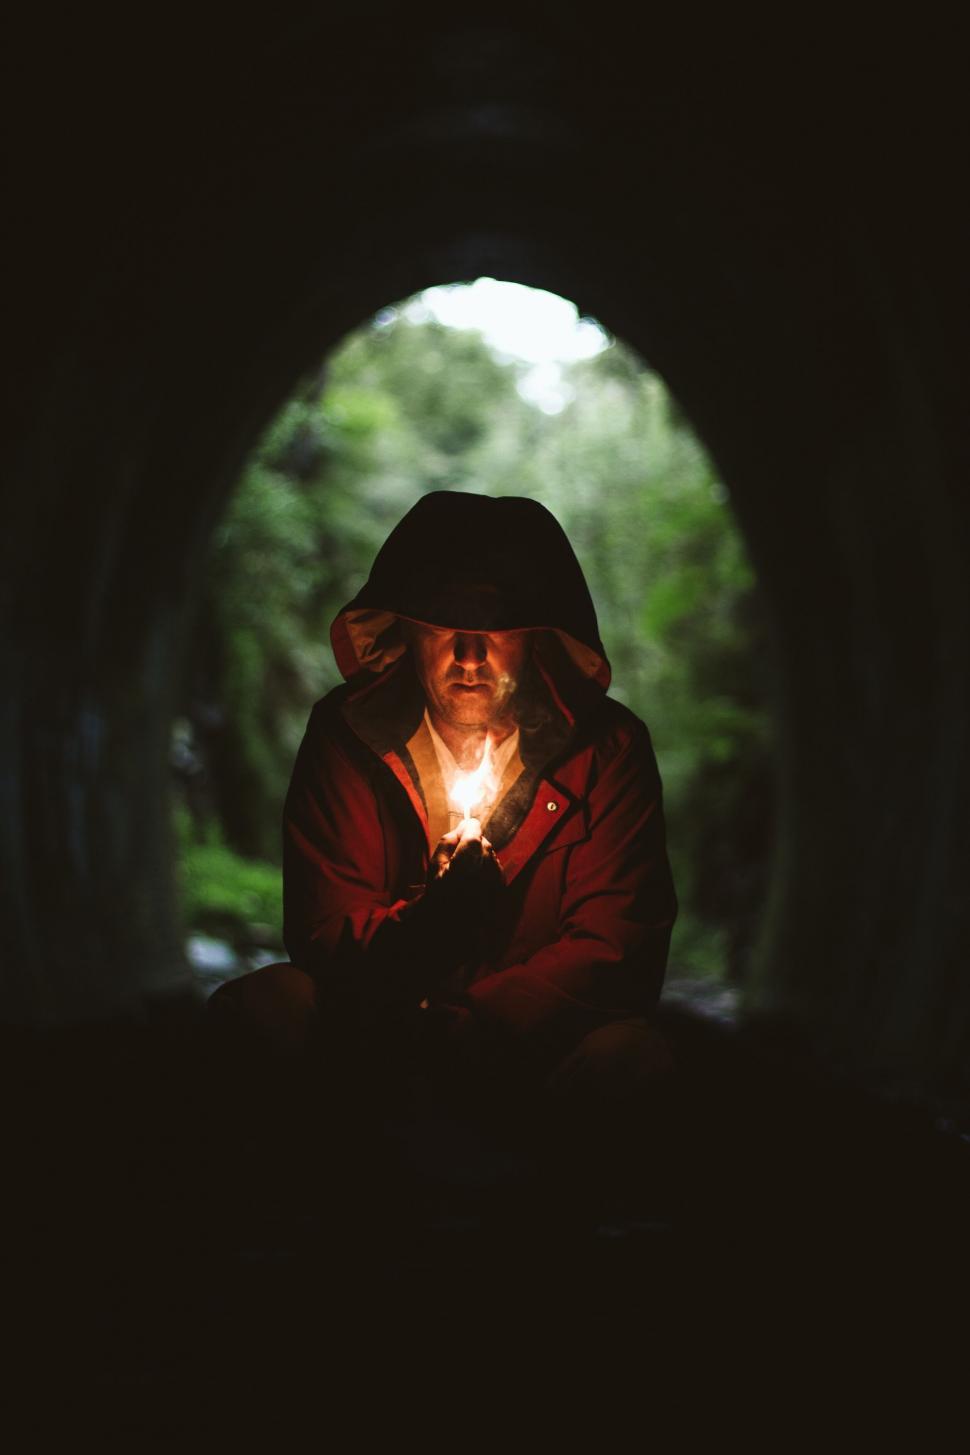 Free Image of Person with illuminated lantern in tunnel 